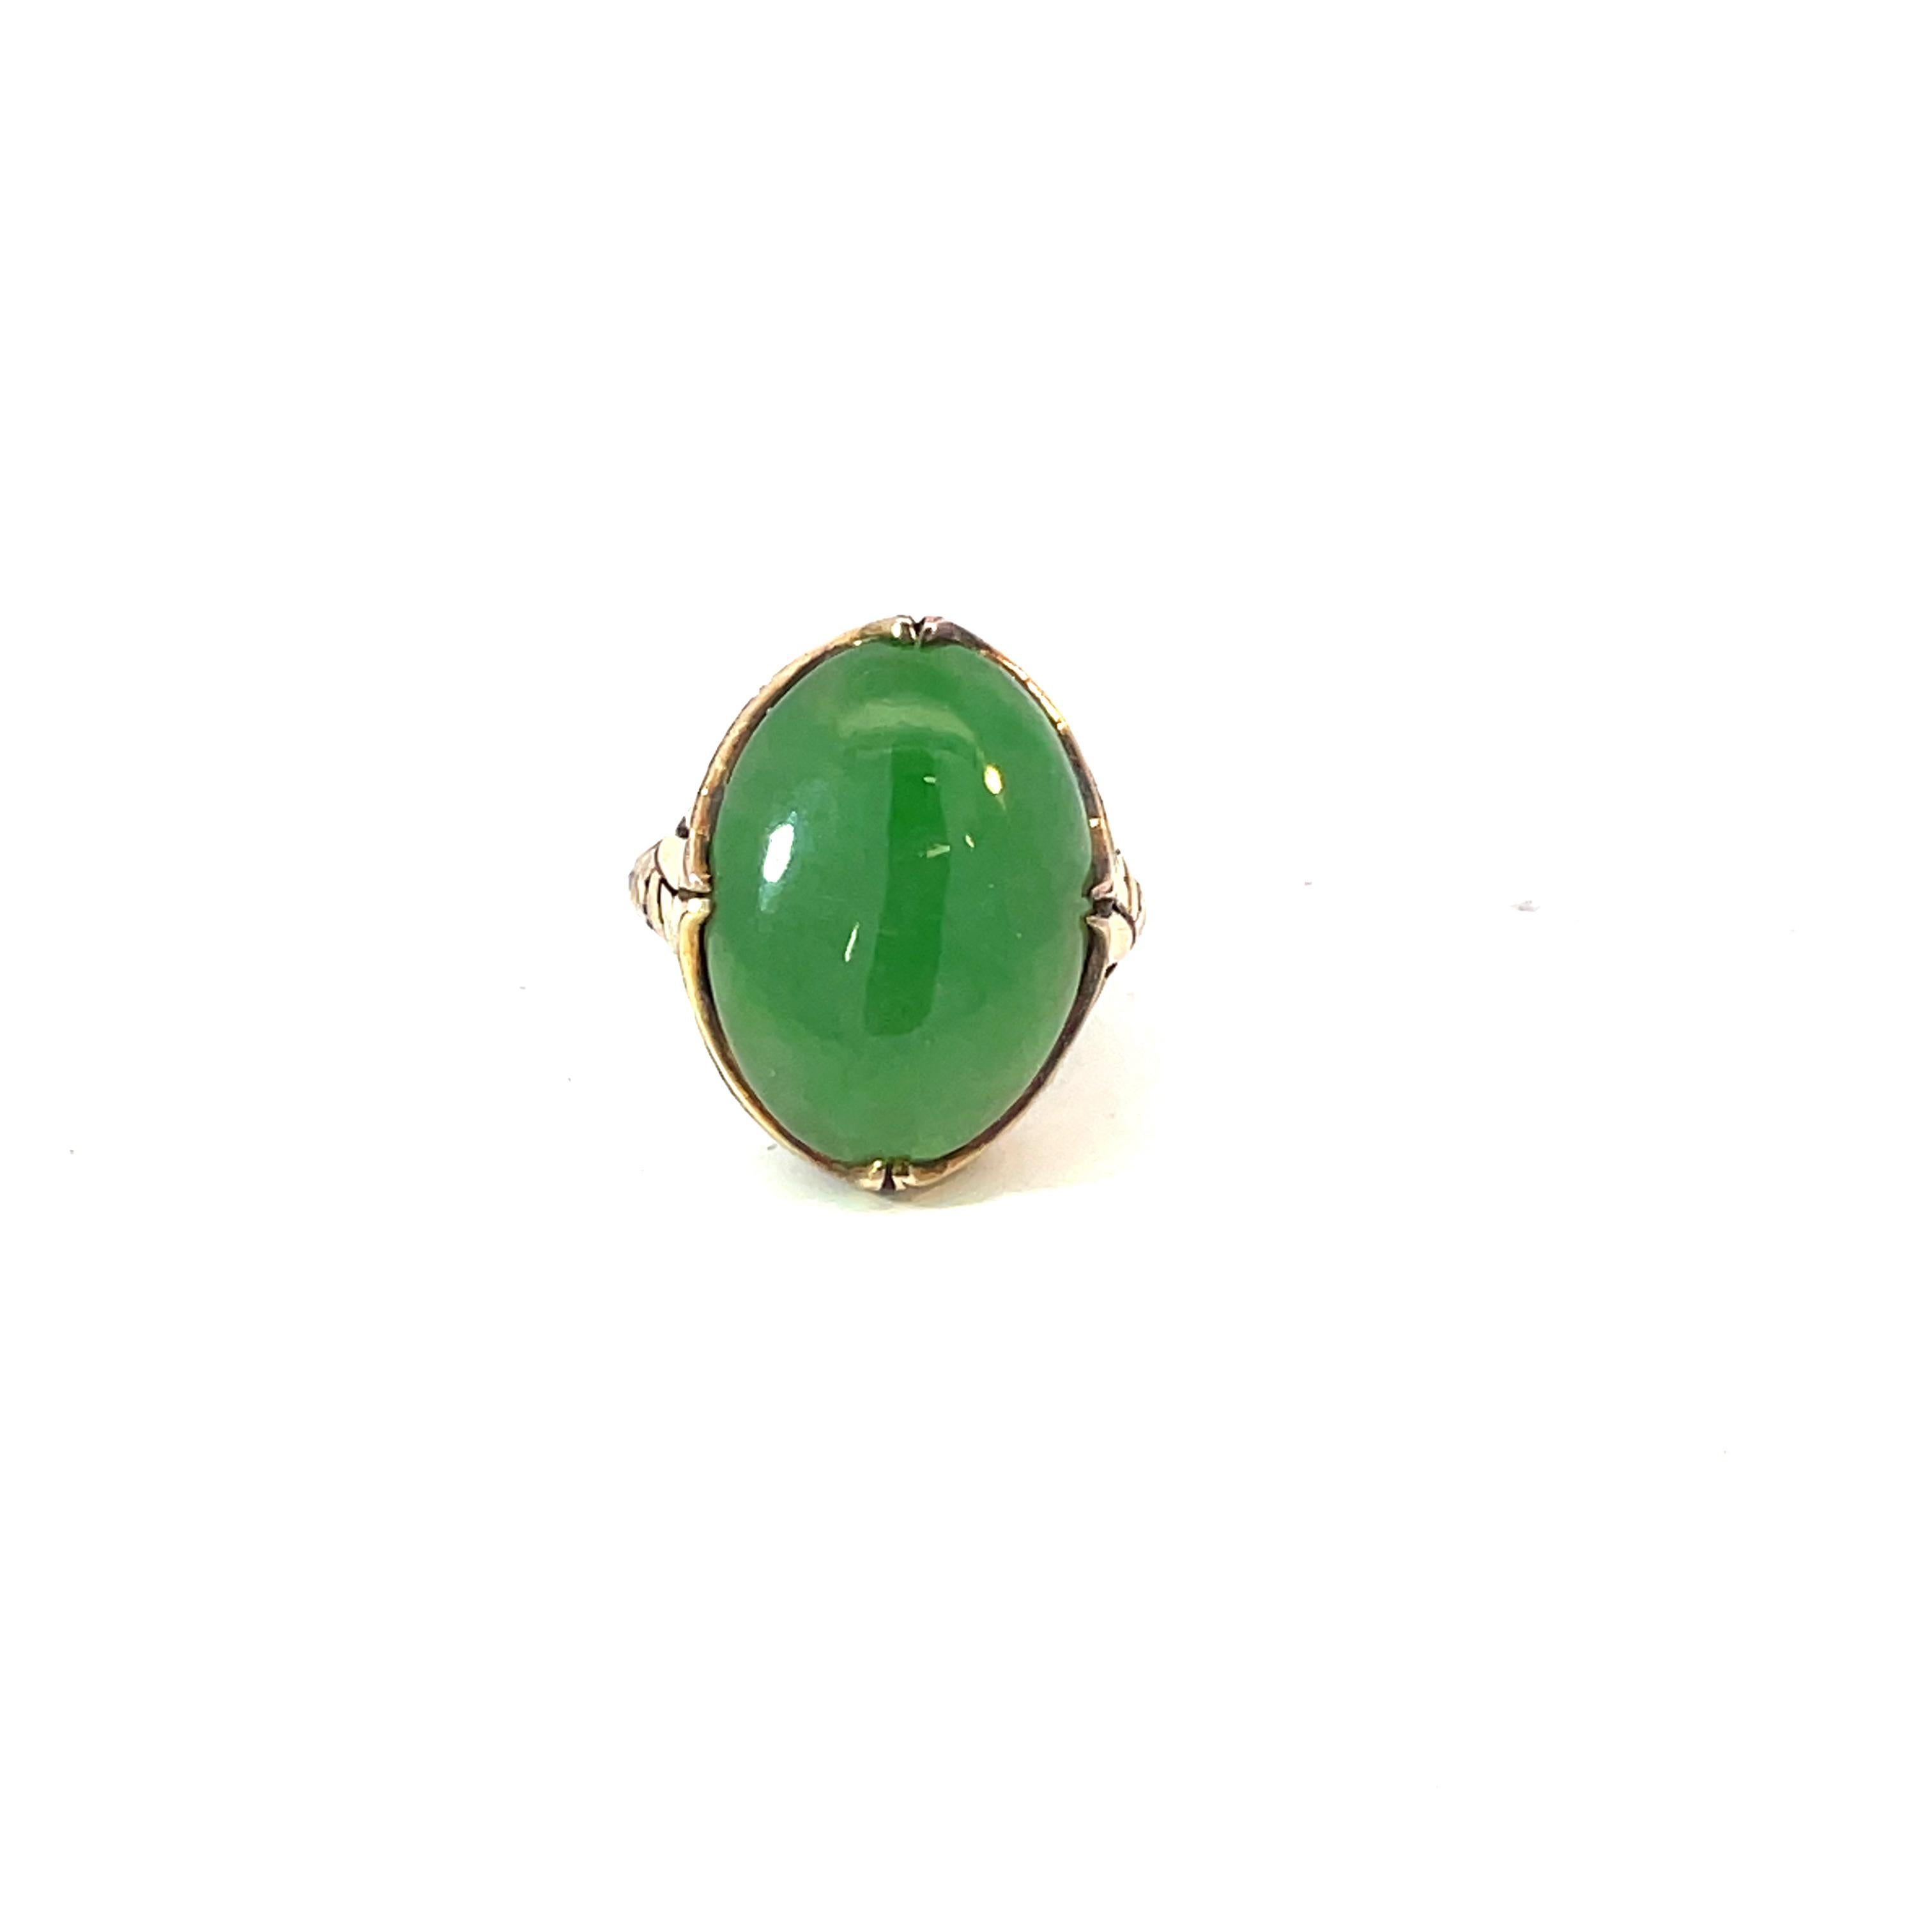 Early 20th century jadeite jade ring in original Hong Kong mounting set with a natural color ‘A’ jade jadeite, the oval cabochon measuring 20mm x15mm x 6mm, in a beautifully engraved ring. The 14K ring, well-worn and delicate, measures 5/8″ x 7/8″